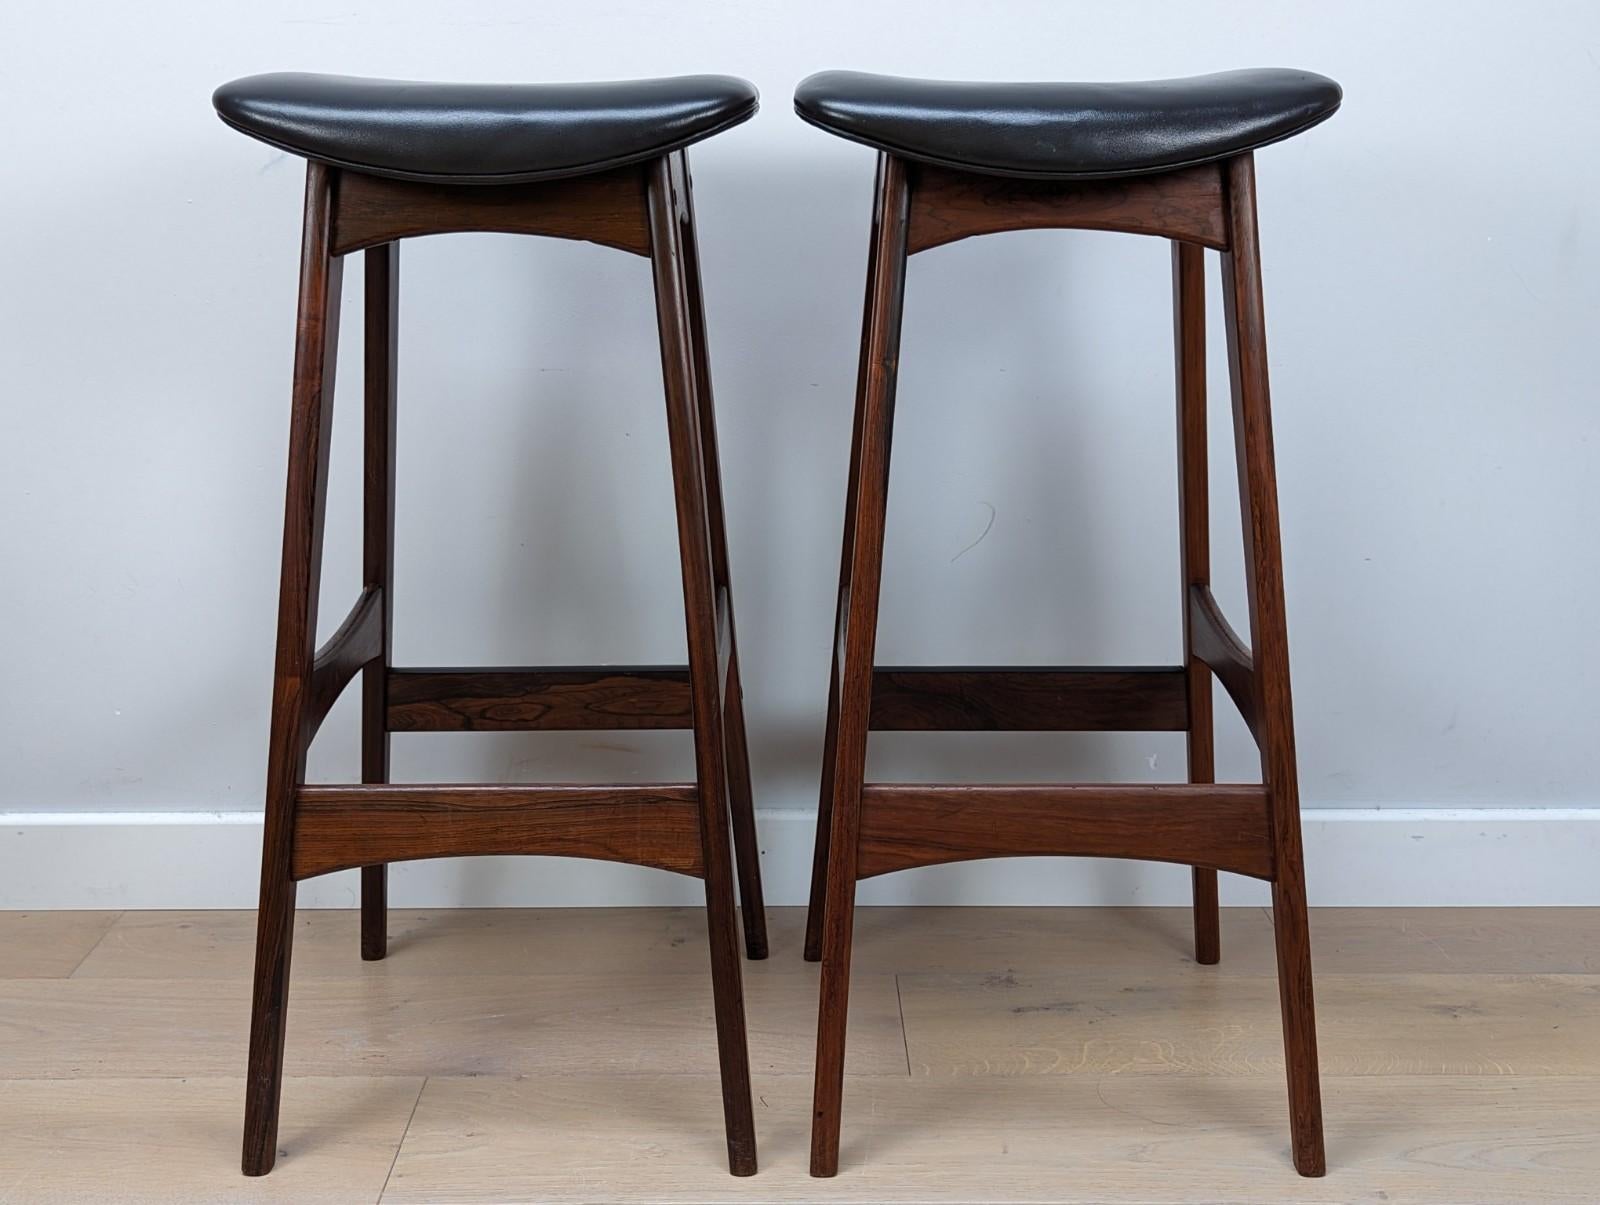 These bar stools are a rare find. They are designed by the renowned Danish designer Johannes Andersen and produced by BRDR Andersen Vejen Møbelfabrik in Denmark. The bar stool is executed in teak and upholstered in black leather.

 The legs are